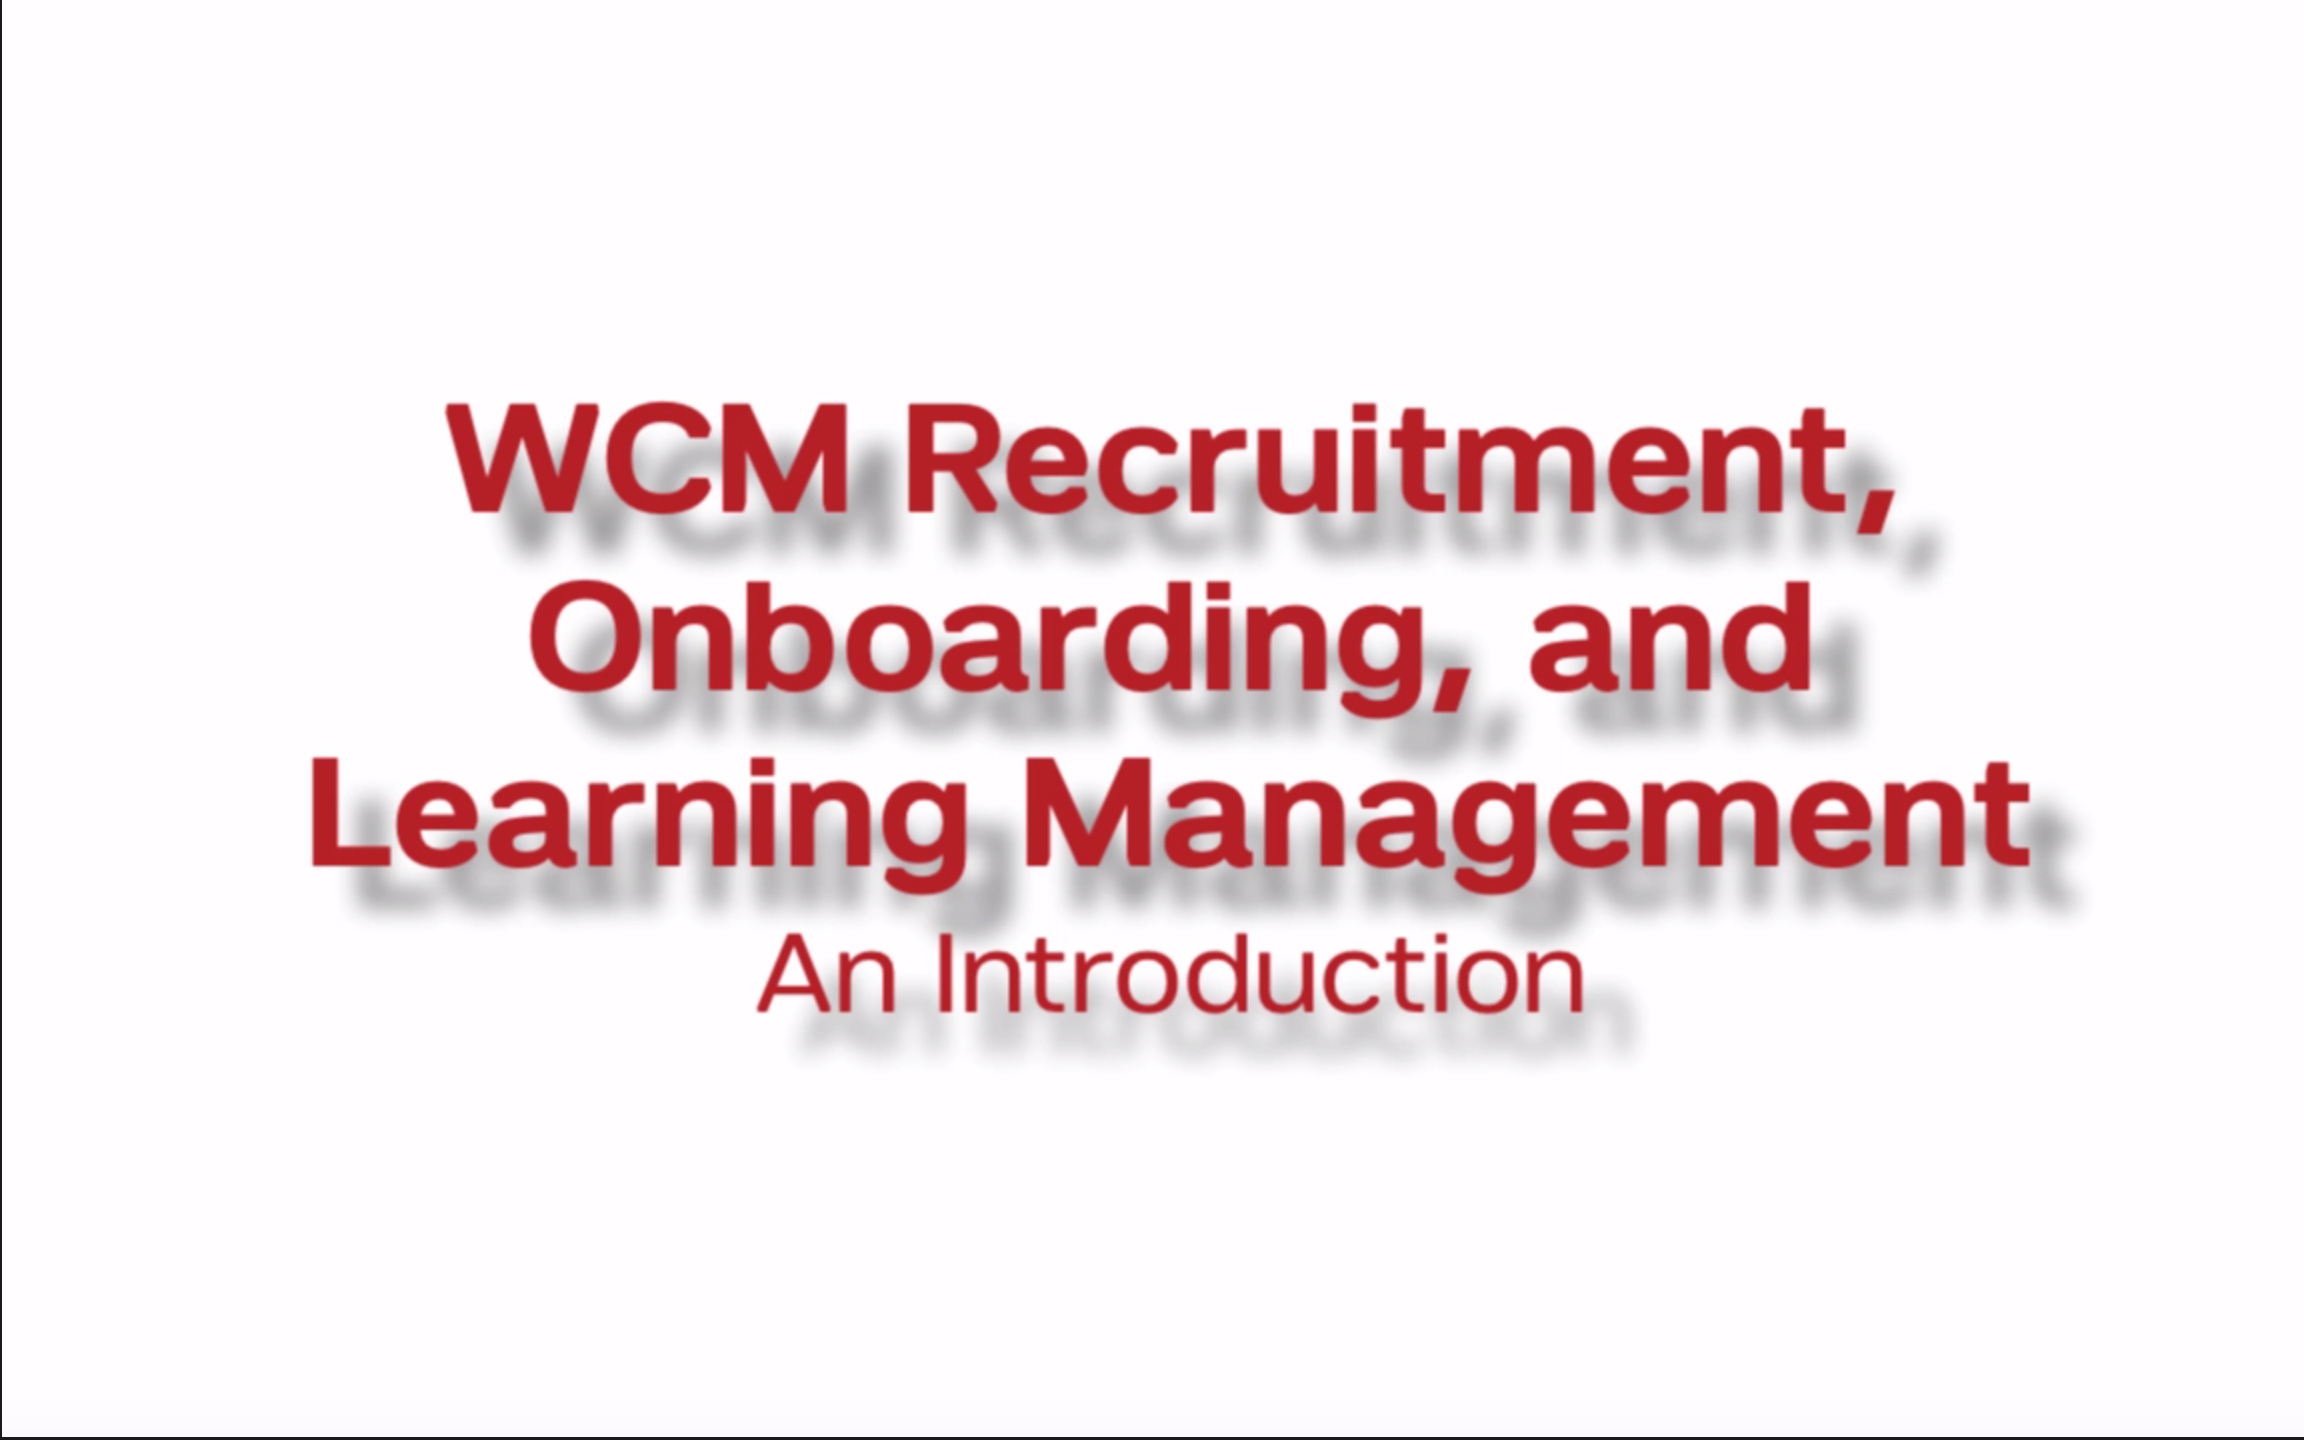 WCM Recruitment, On boarding, and Learning Management